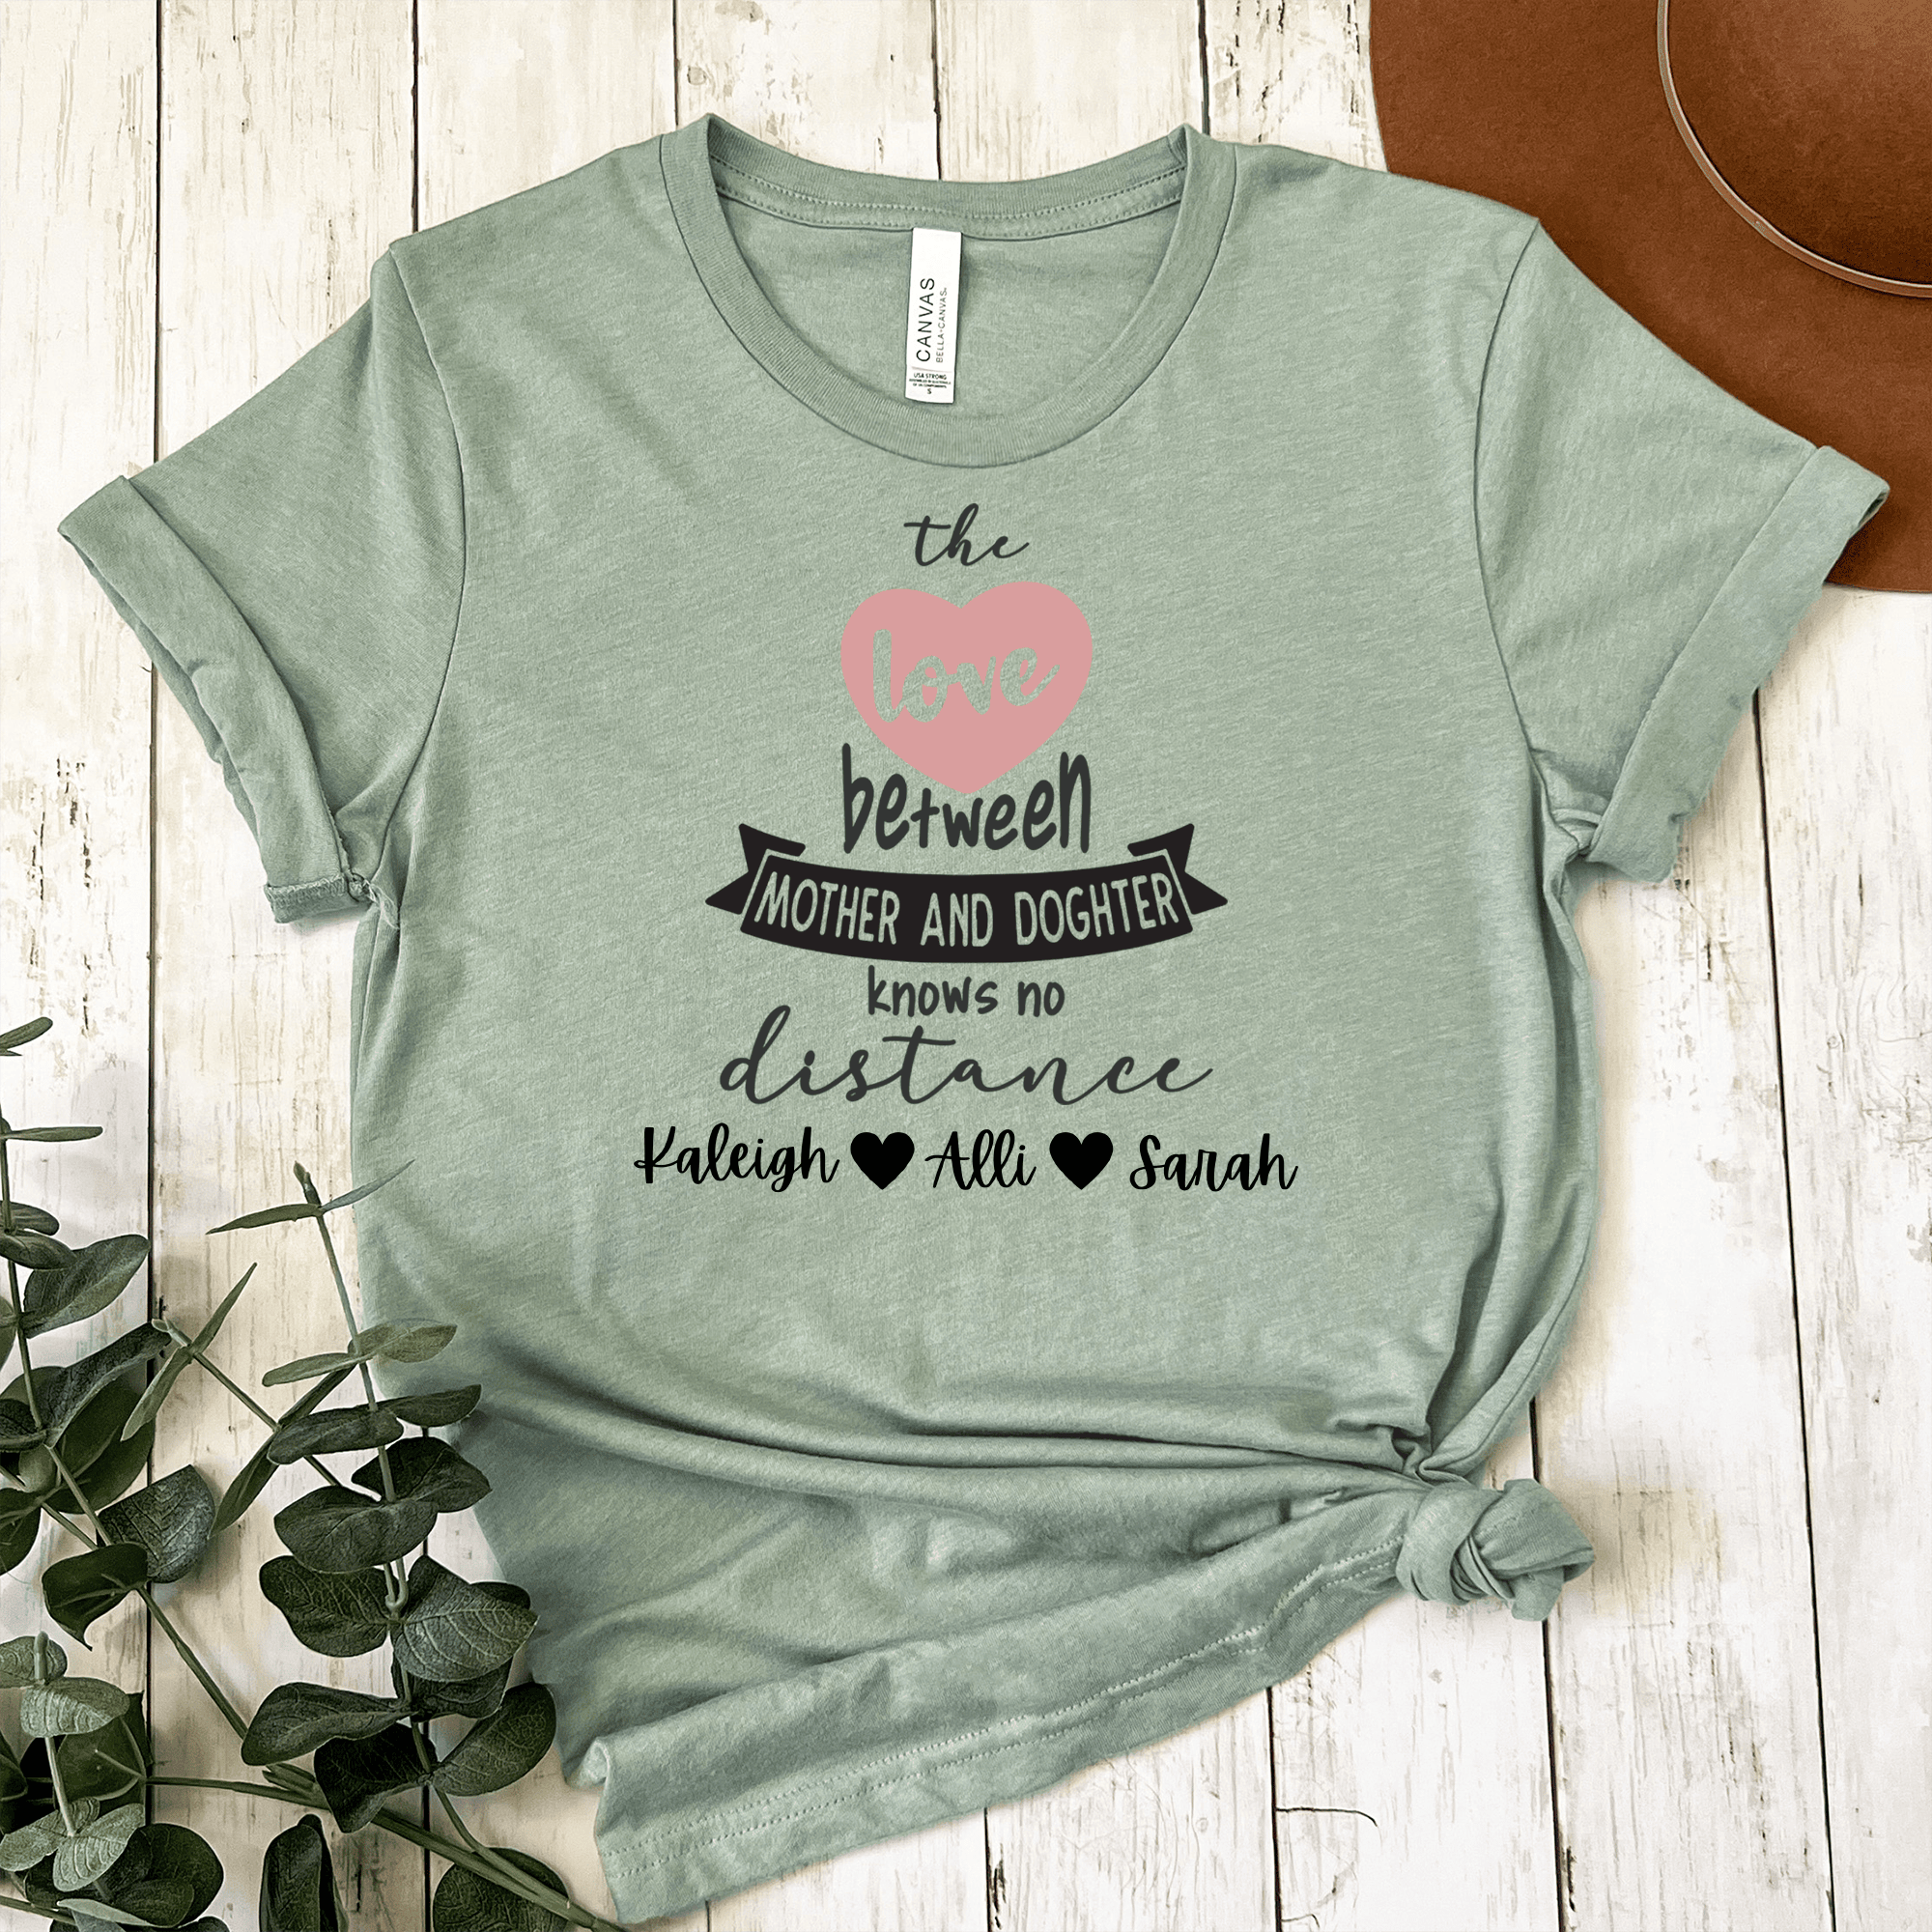 Womens Light Green T Shirt with Mothers-And-Daughters design